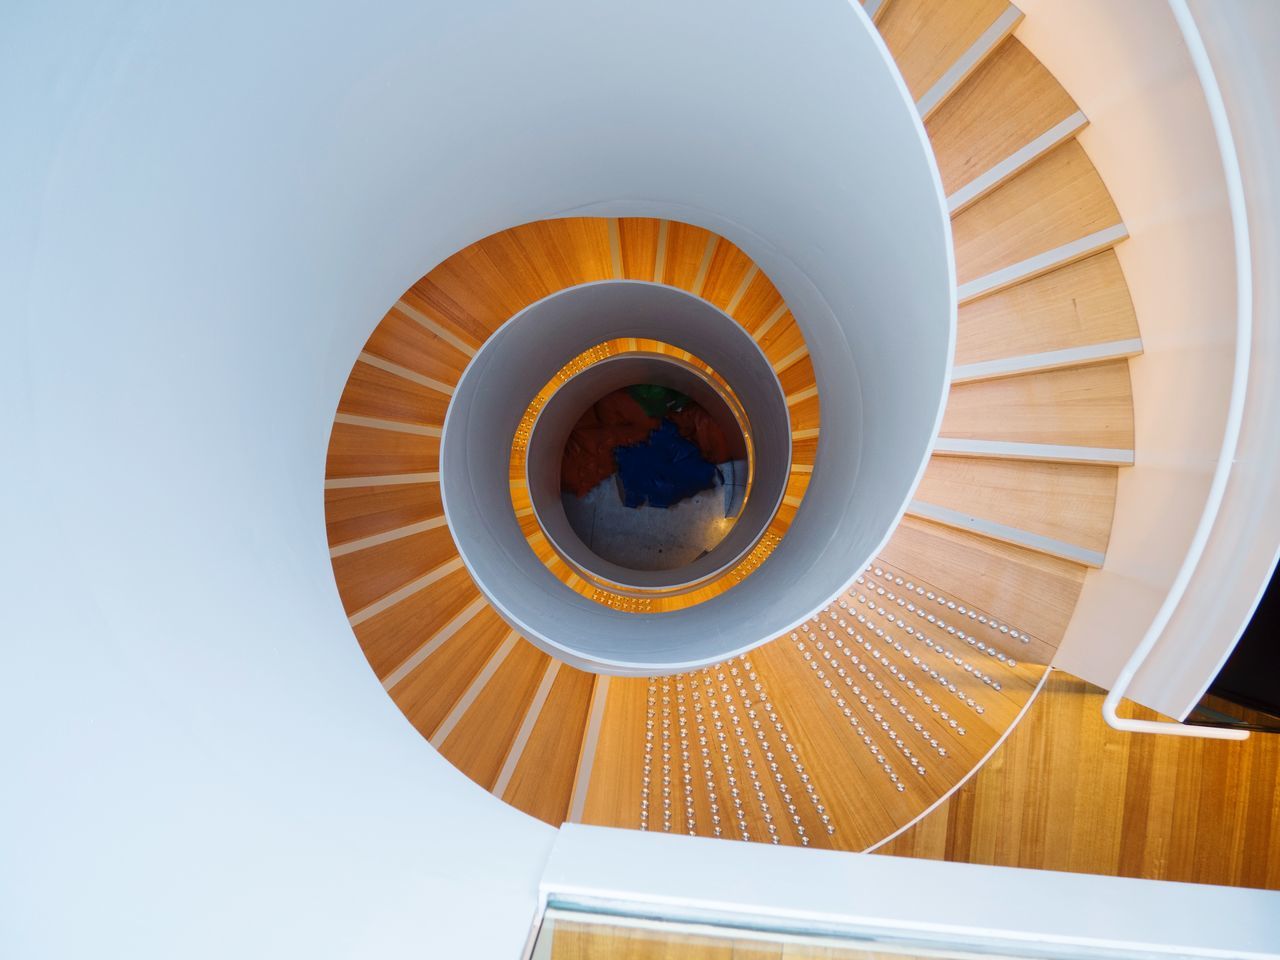 architecture, low angle view, built structure, spiral, steps and staircases, staircase, no people, shape, directly below, sky, indoors, railing, geometric shape, design, pattern, spiral staircase, day, circle, building, digital composite, ceiling